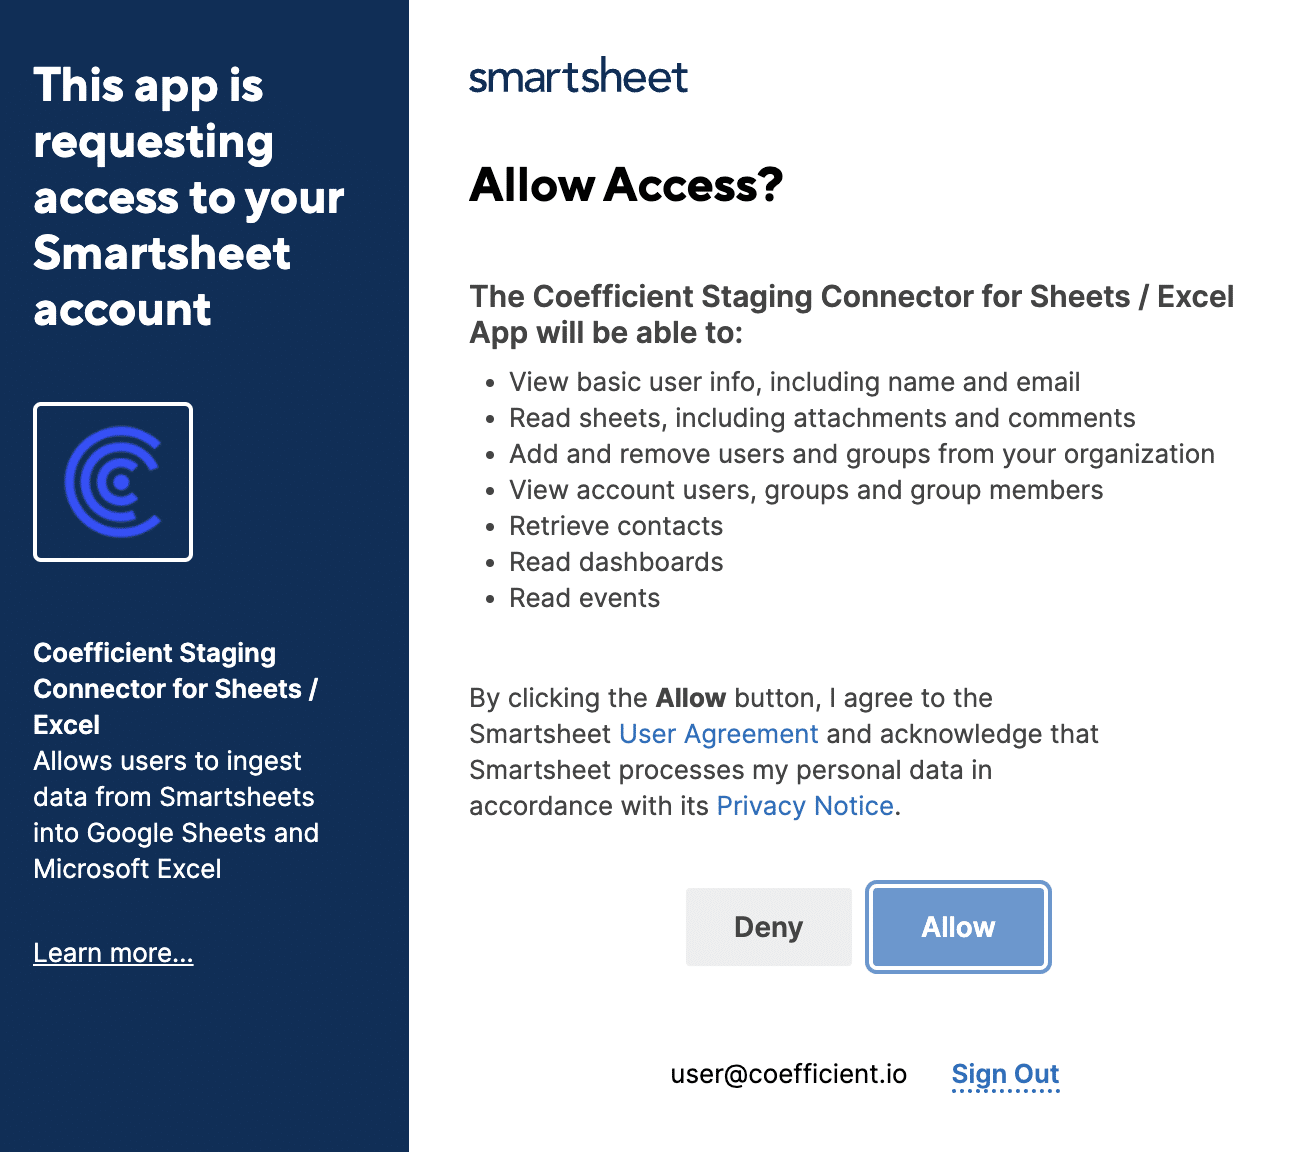 Logging into the Smartsheet account to allow Coefficient access in Google Sheets.